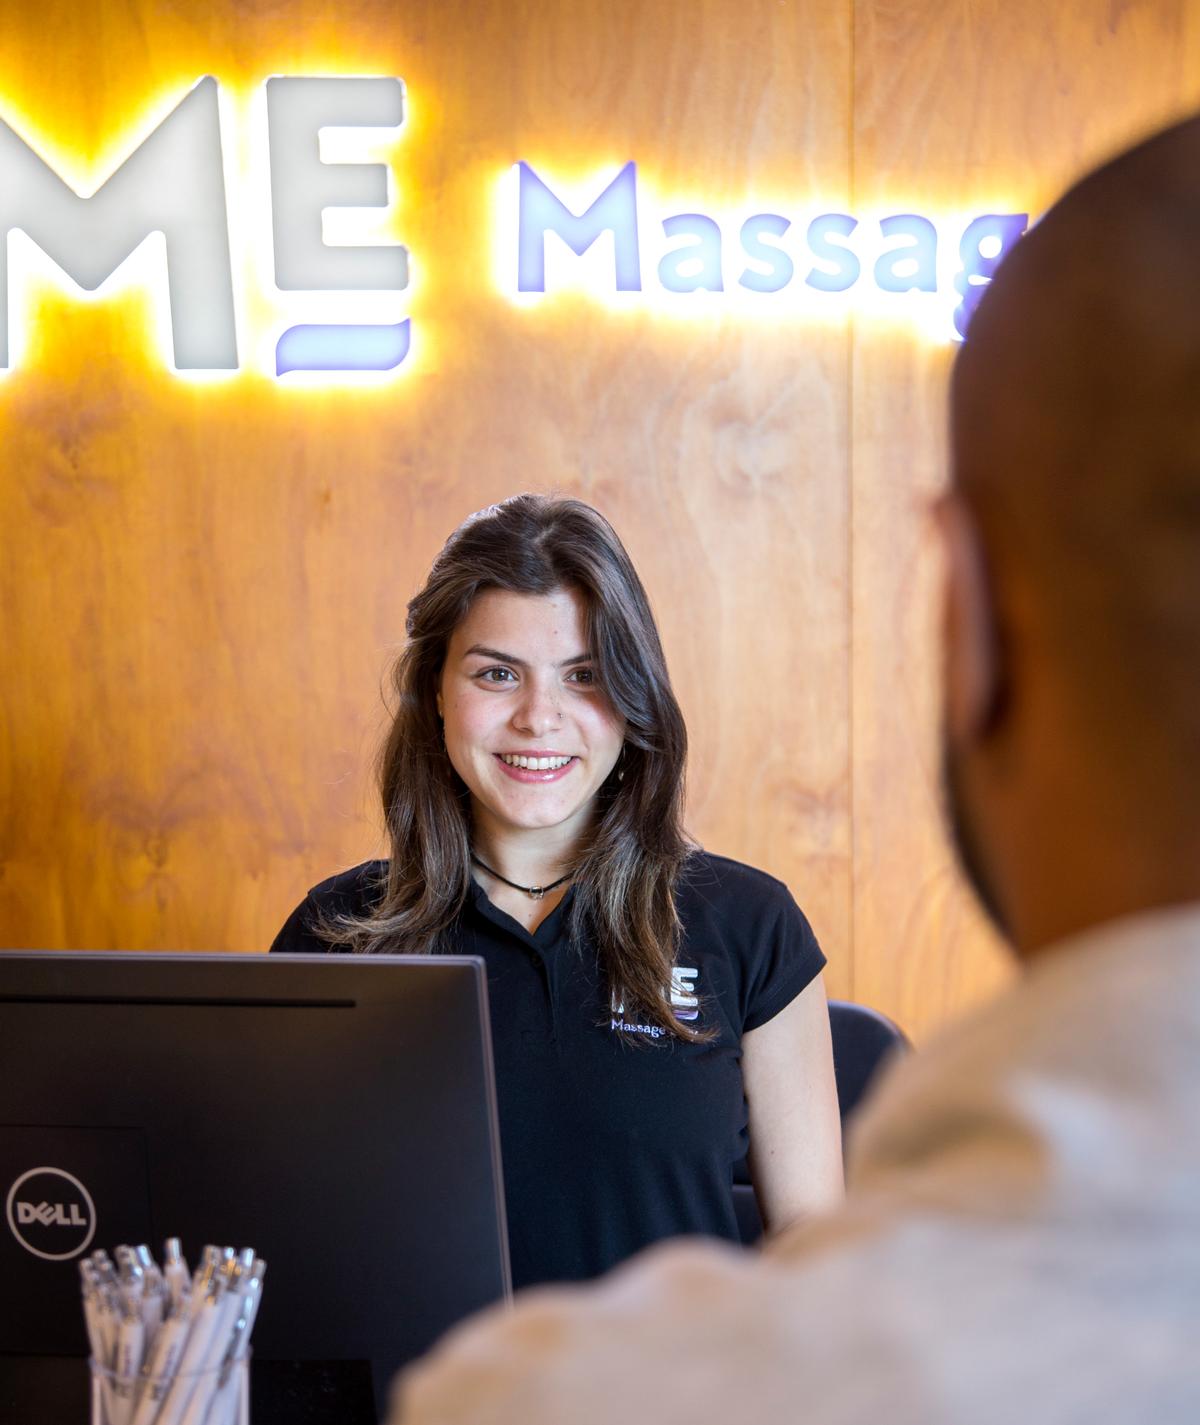 On 28 September, 1,150 Massage Envy franchised locations will donate US$10 to the Arthritis Foundation for every 60-minute massage or facial session they perform / 